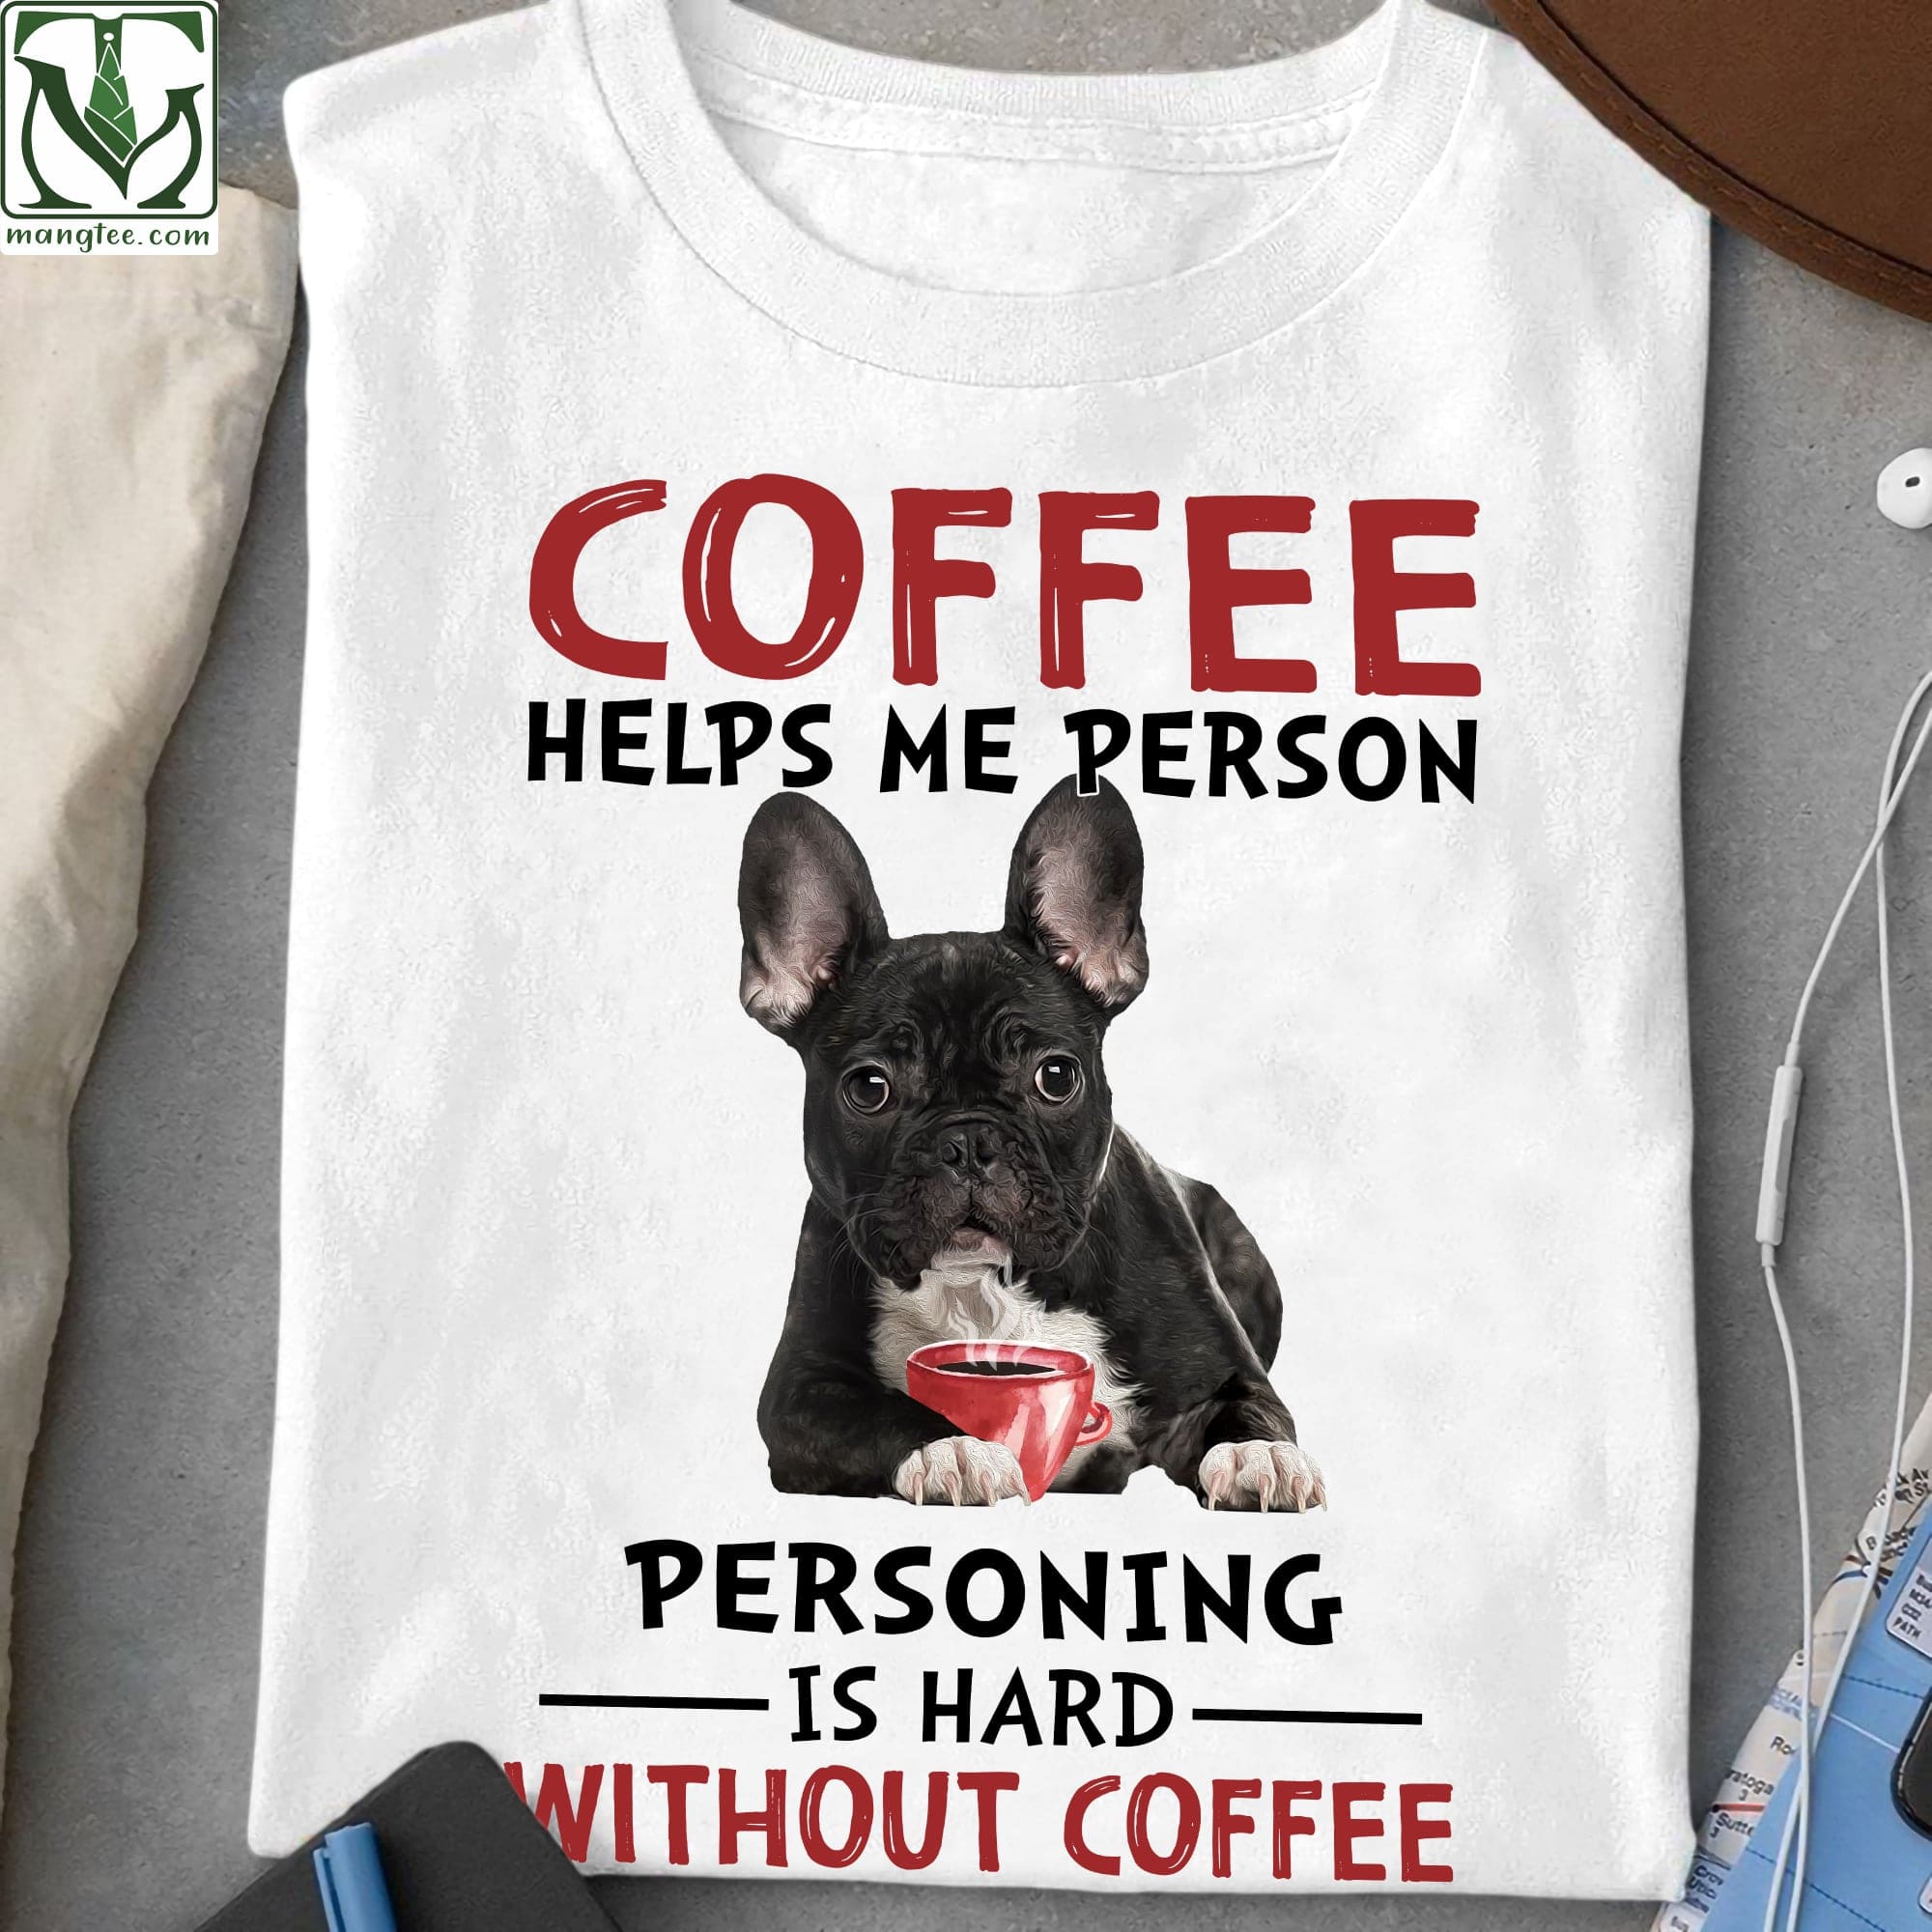 French Bulldog Coffee - Coffee helps me person personing is hard without coffee